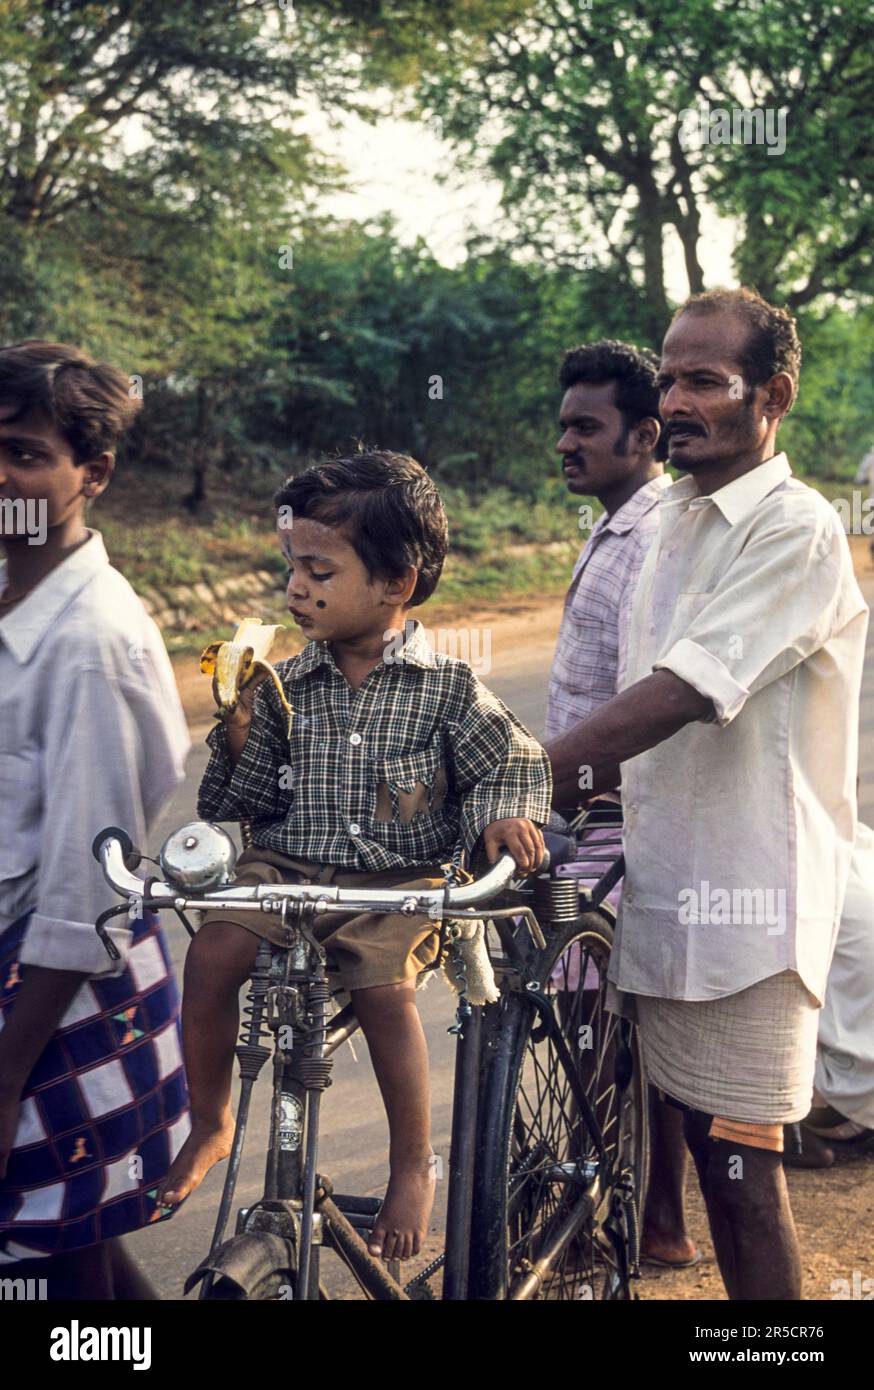 A boy sitting on a bicycle and eating a banana, with his father standing nearby at Avaniyapuram, Madurai, Tamil Nadu, South India, India, Asia Stock Photo